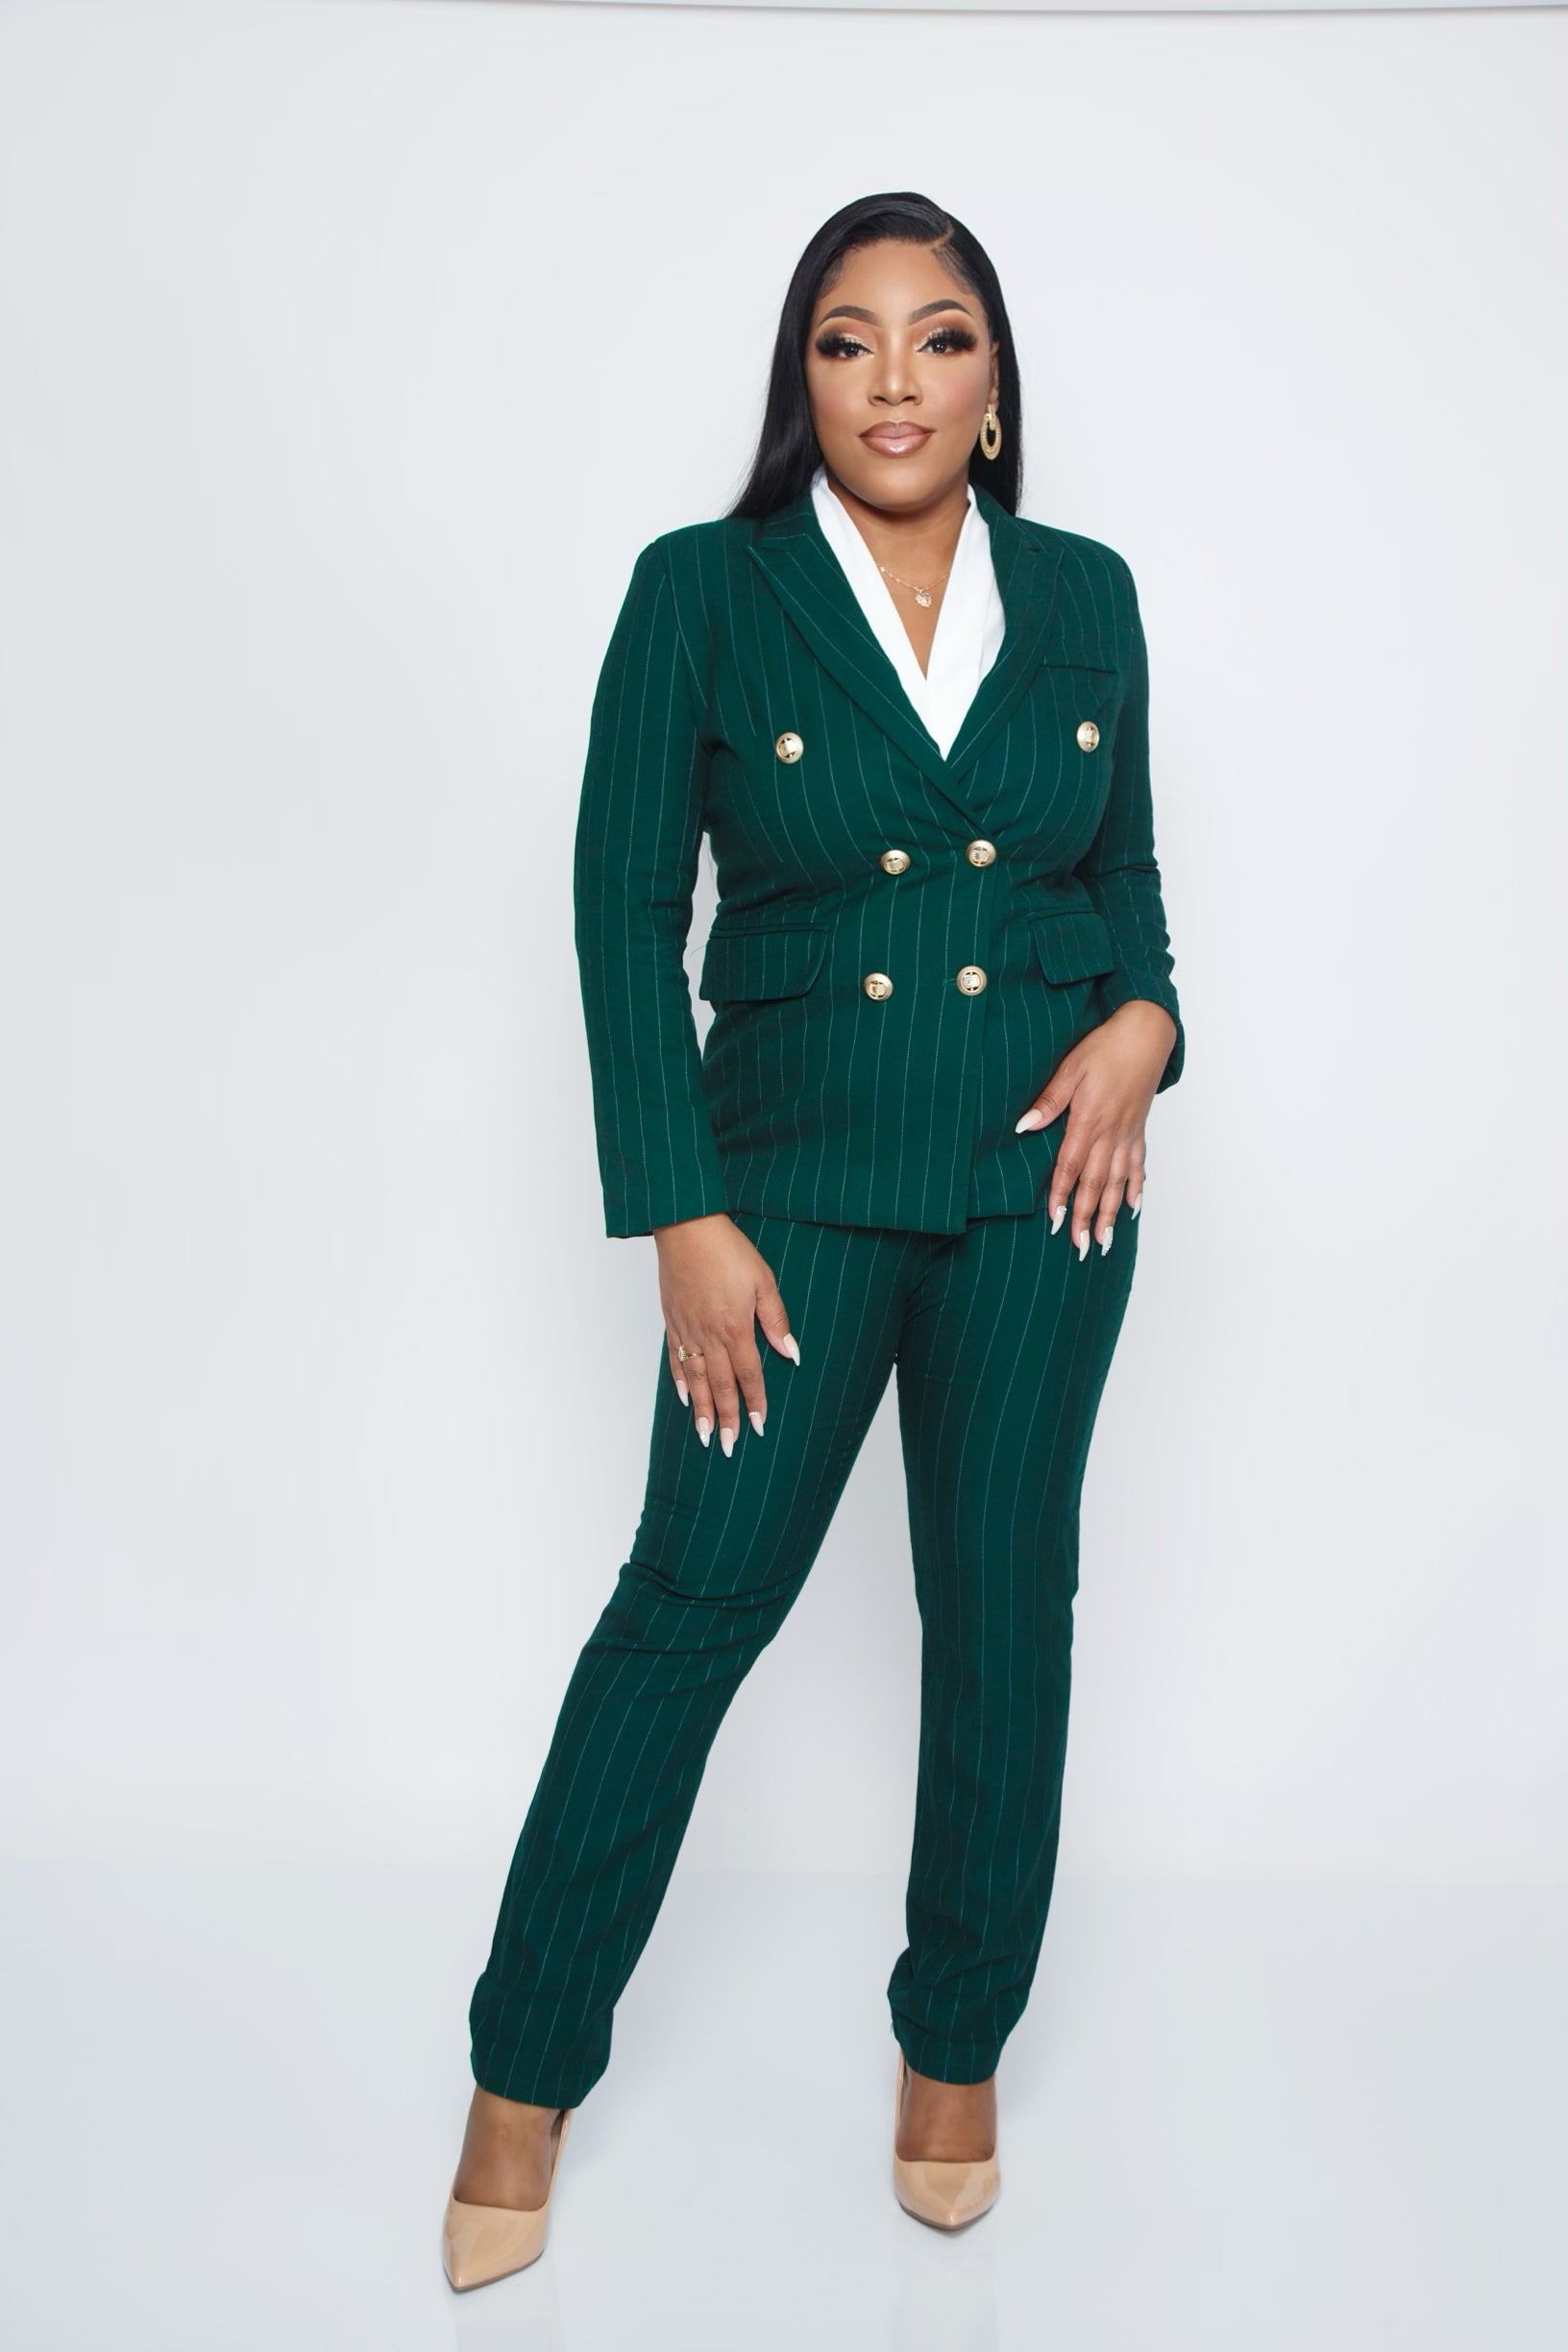 Classy green pant suits for women